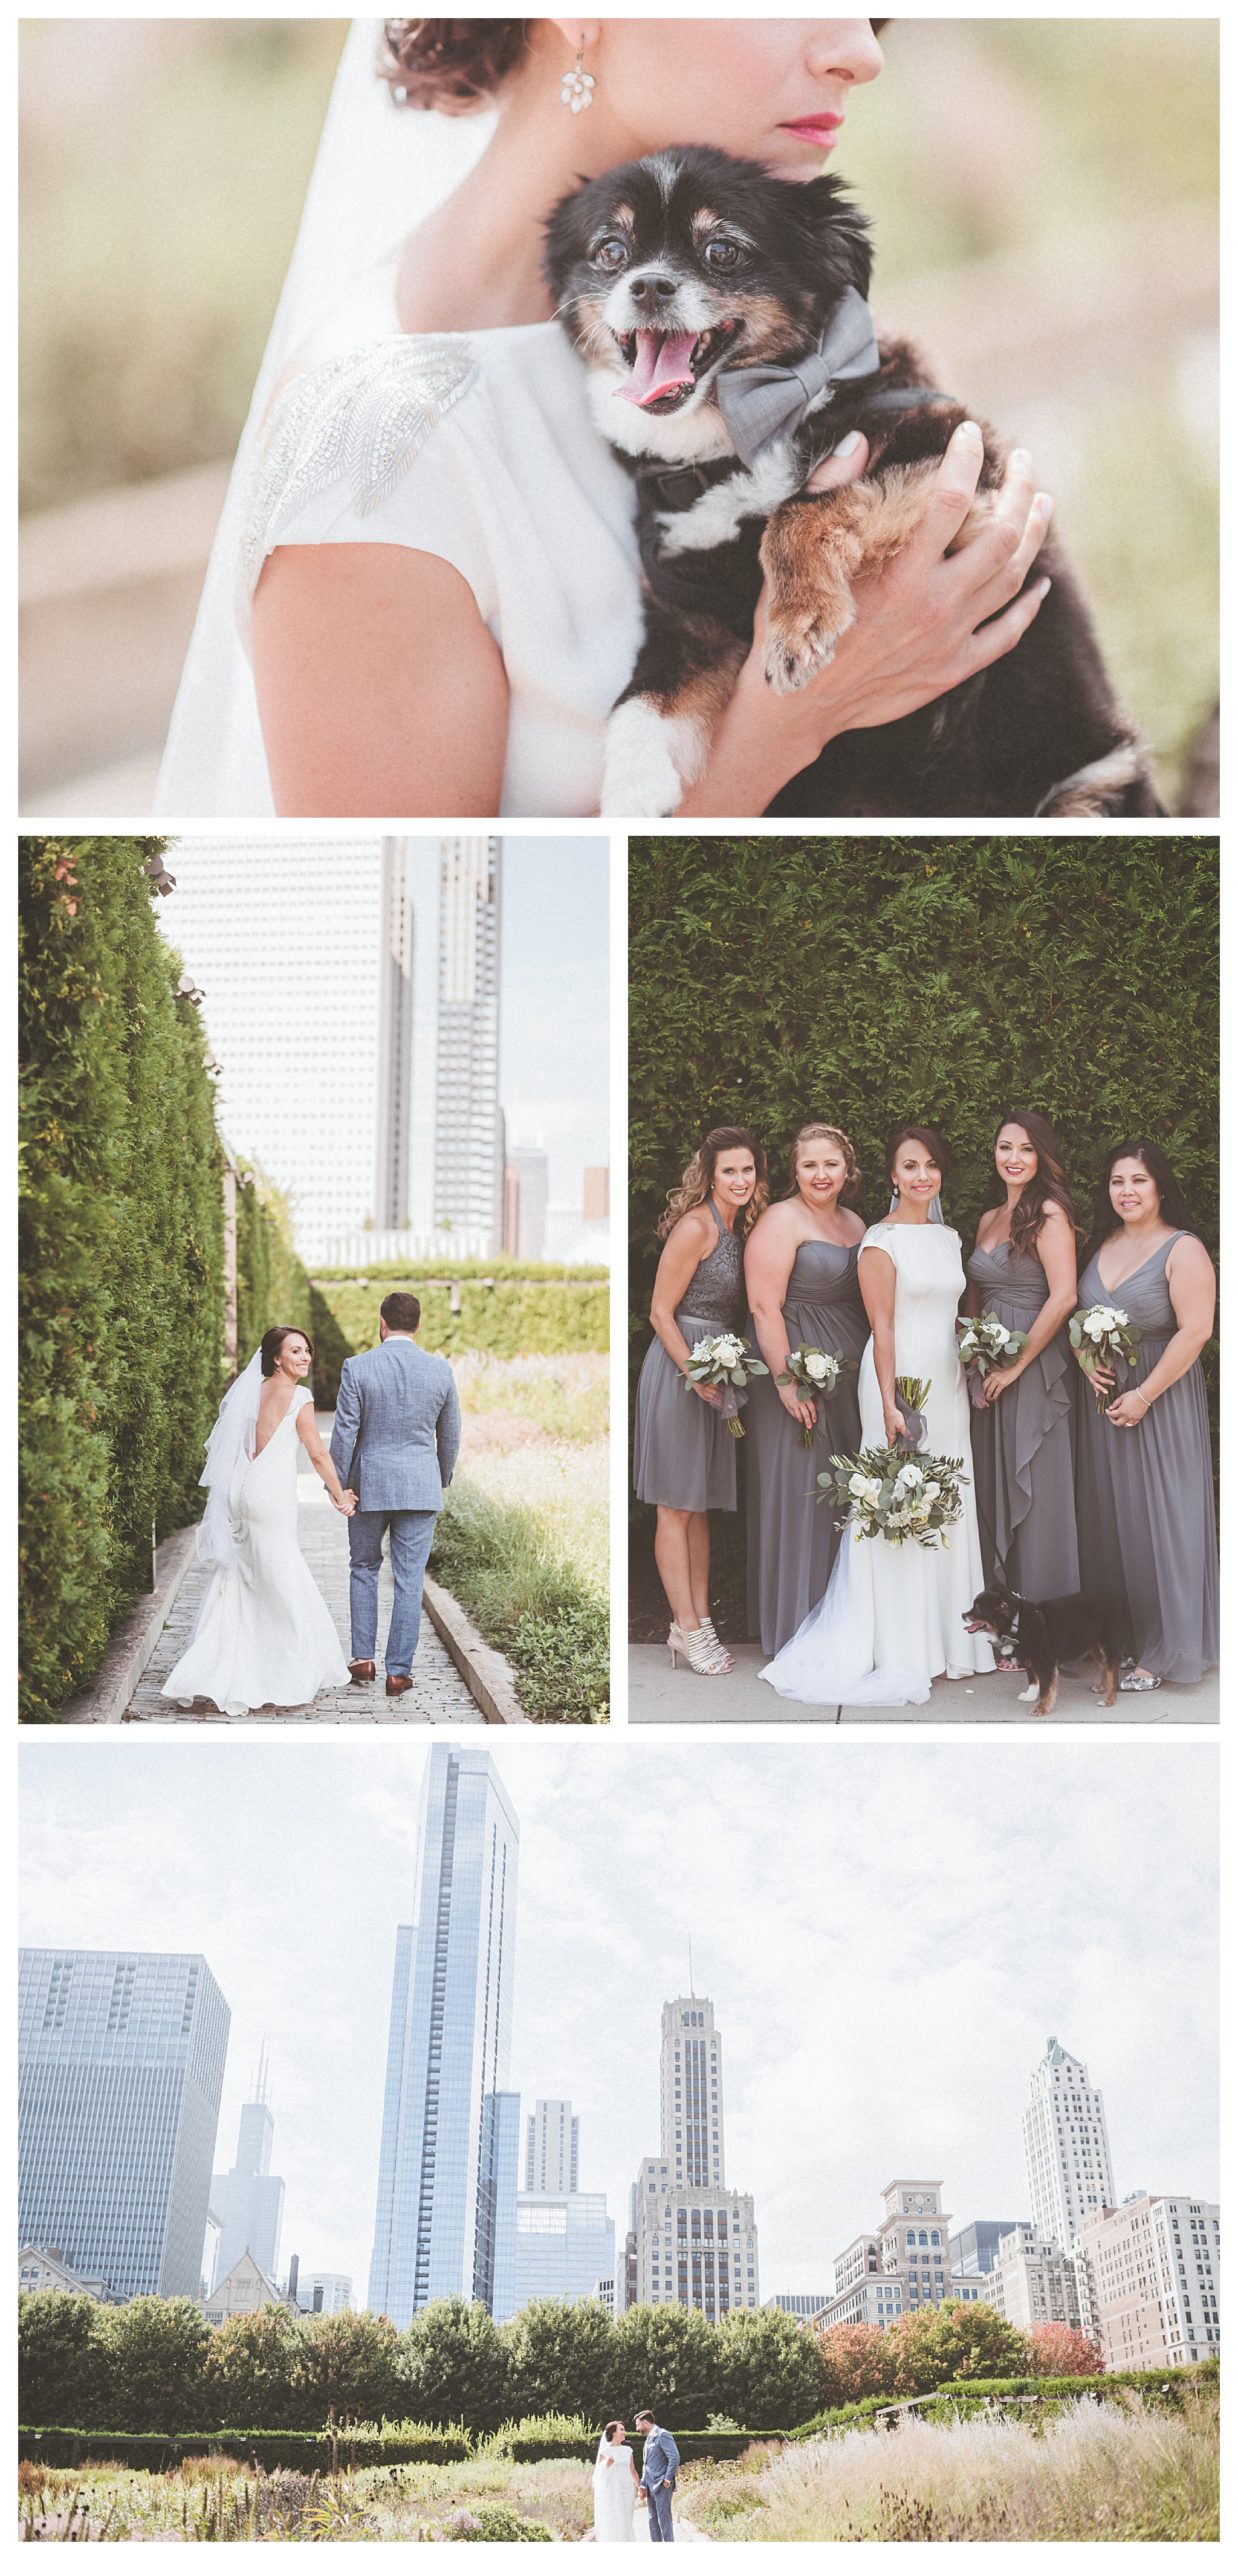 Bridal party photo collage in downtown Chicago Illinois